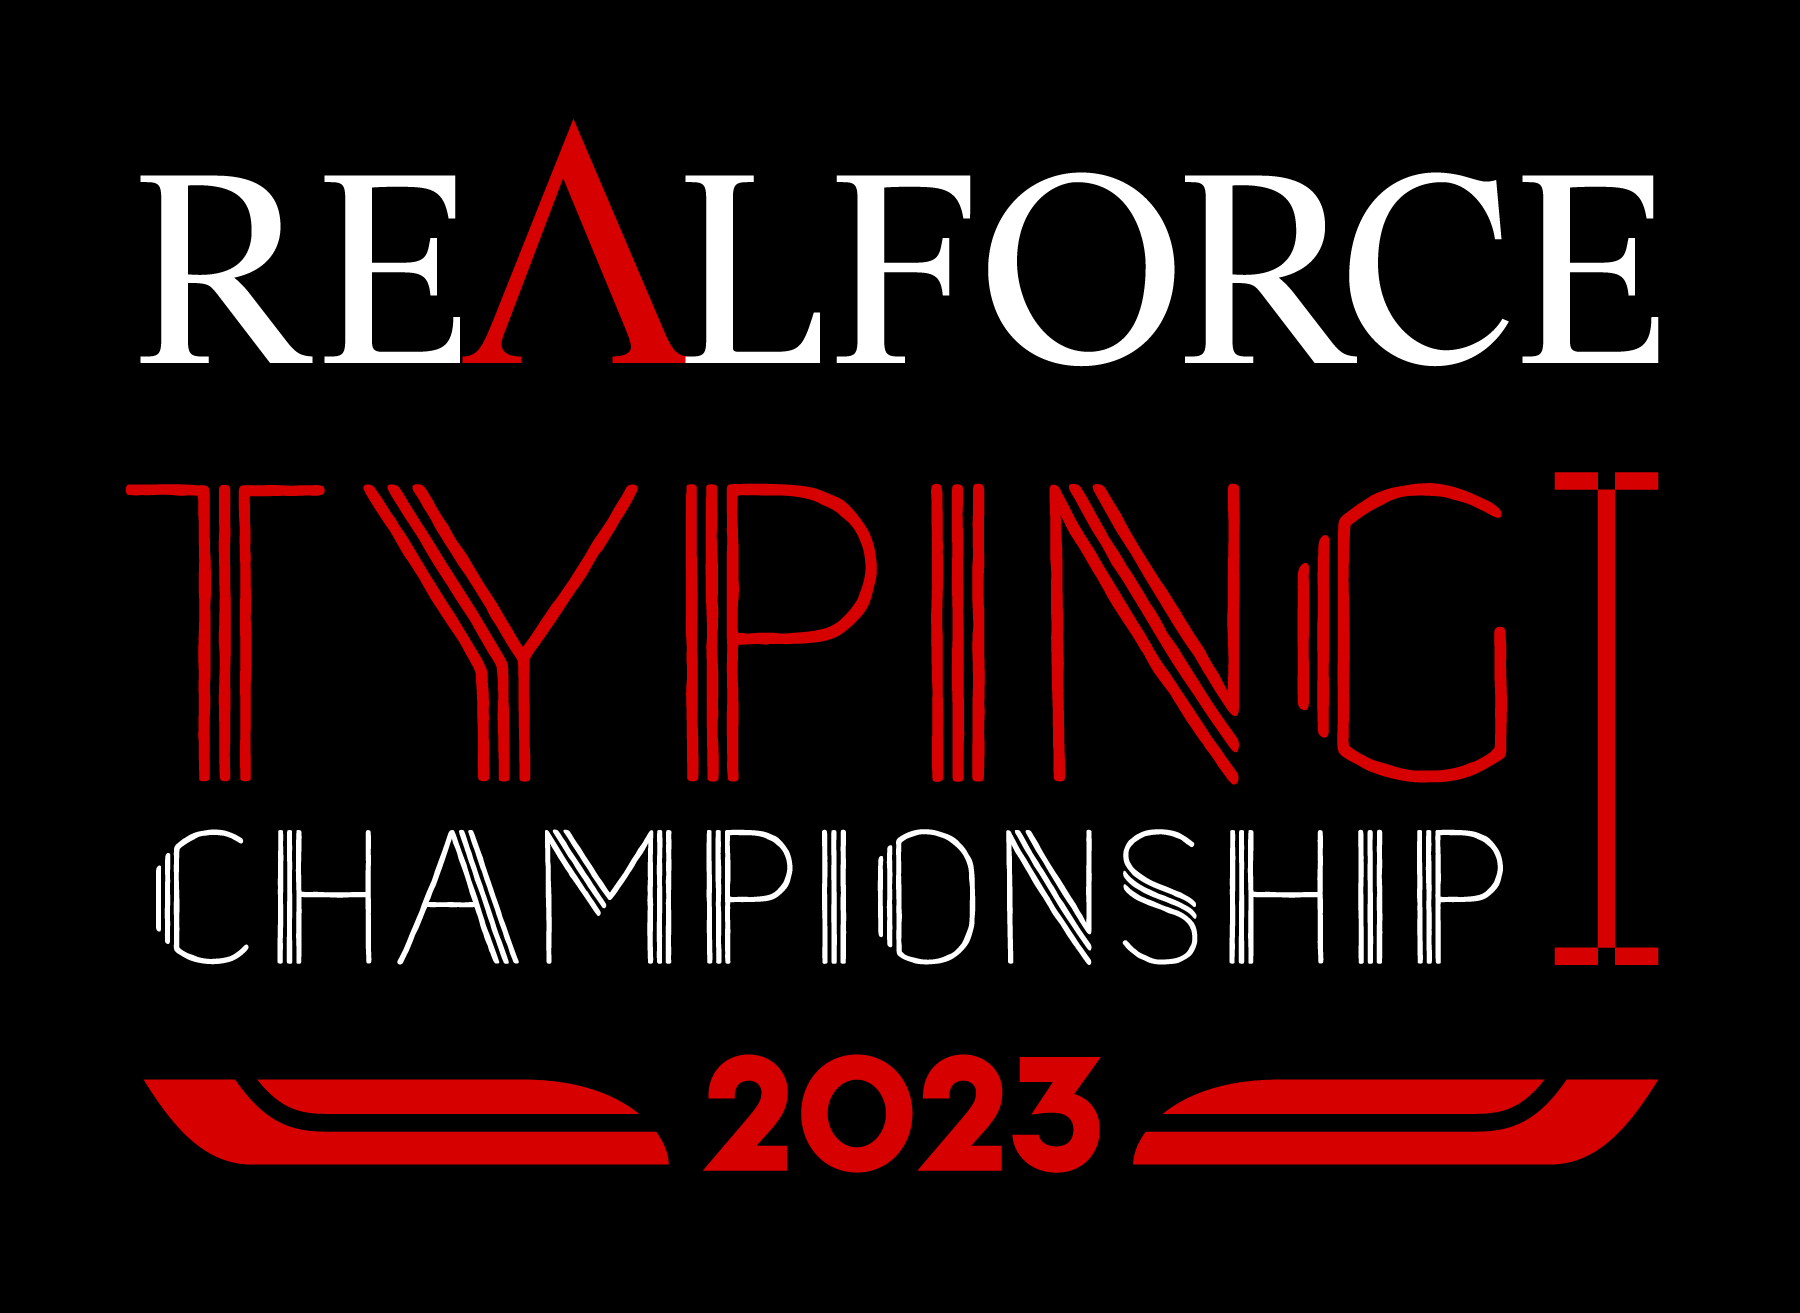 Realforce Typing Championship 2023